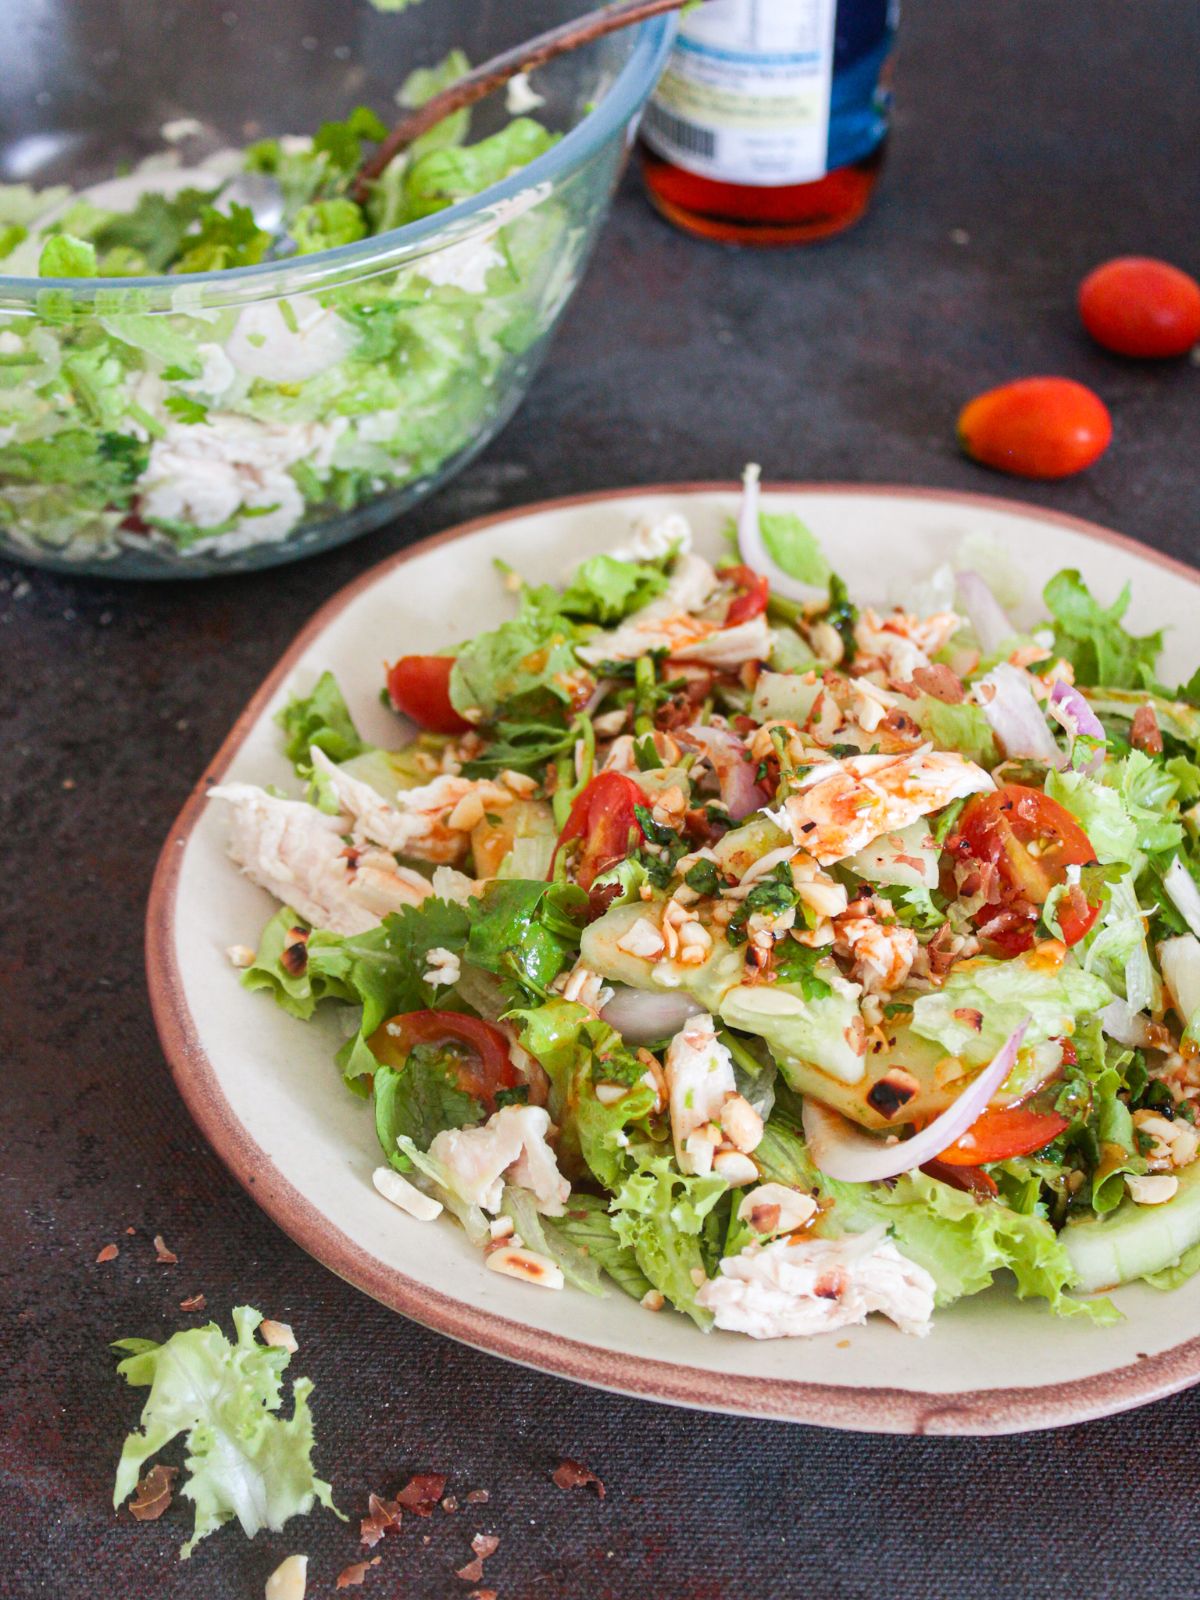 Thai chicken salad on plate by bowl of lettuce